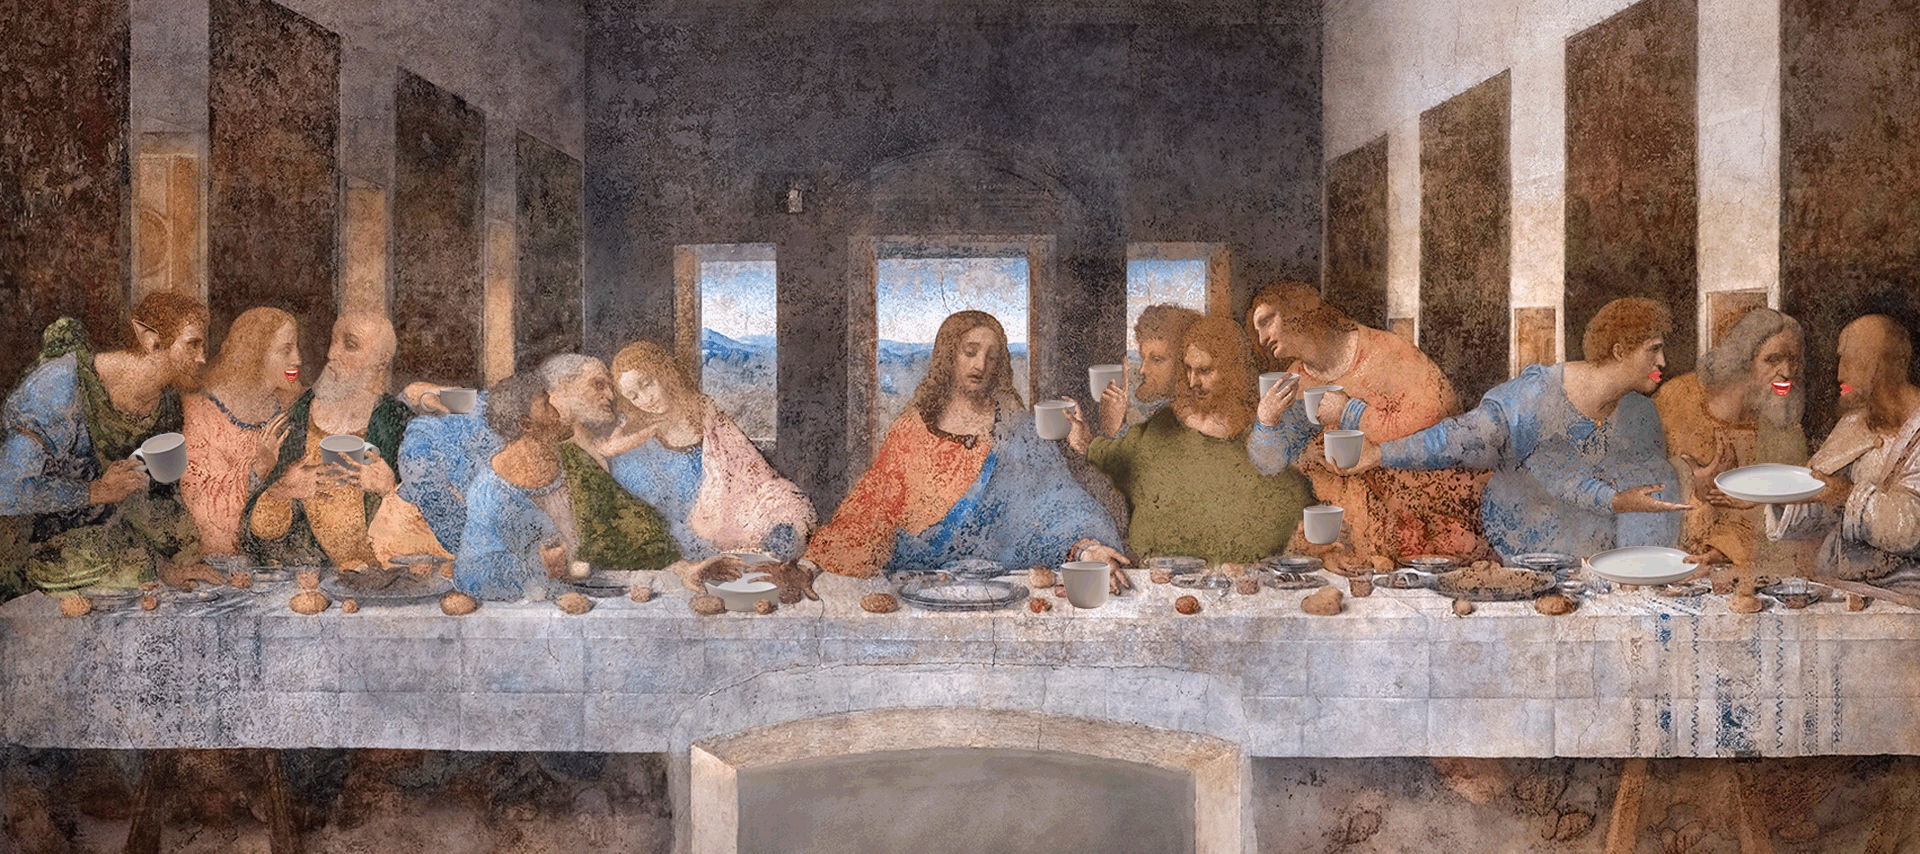 Animated image of The Eternal Supper, and alternate of The Last Supper, where Angie Talleyrand crockery stimulates deep and meaningful conversation